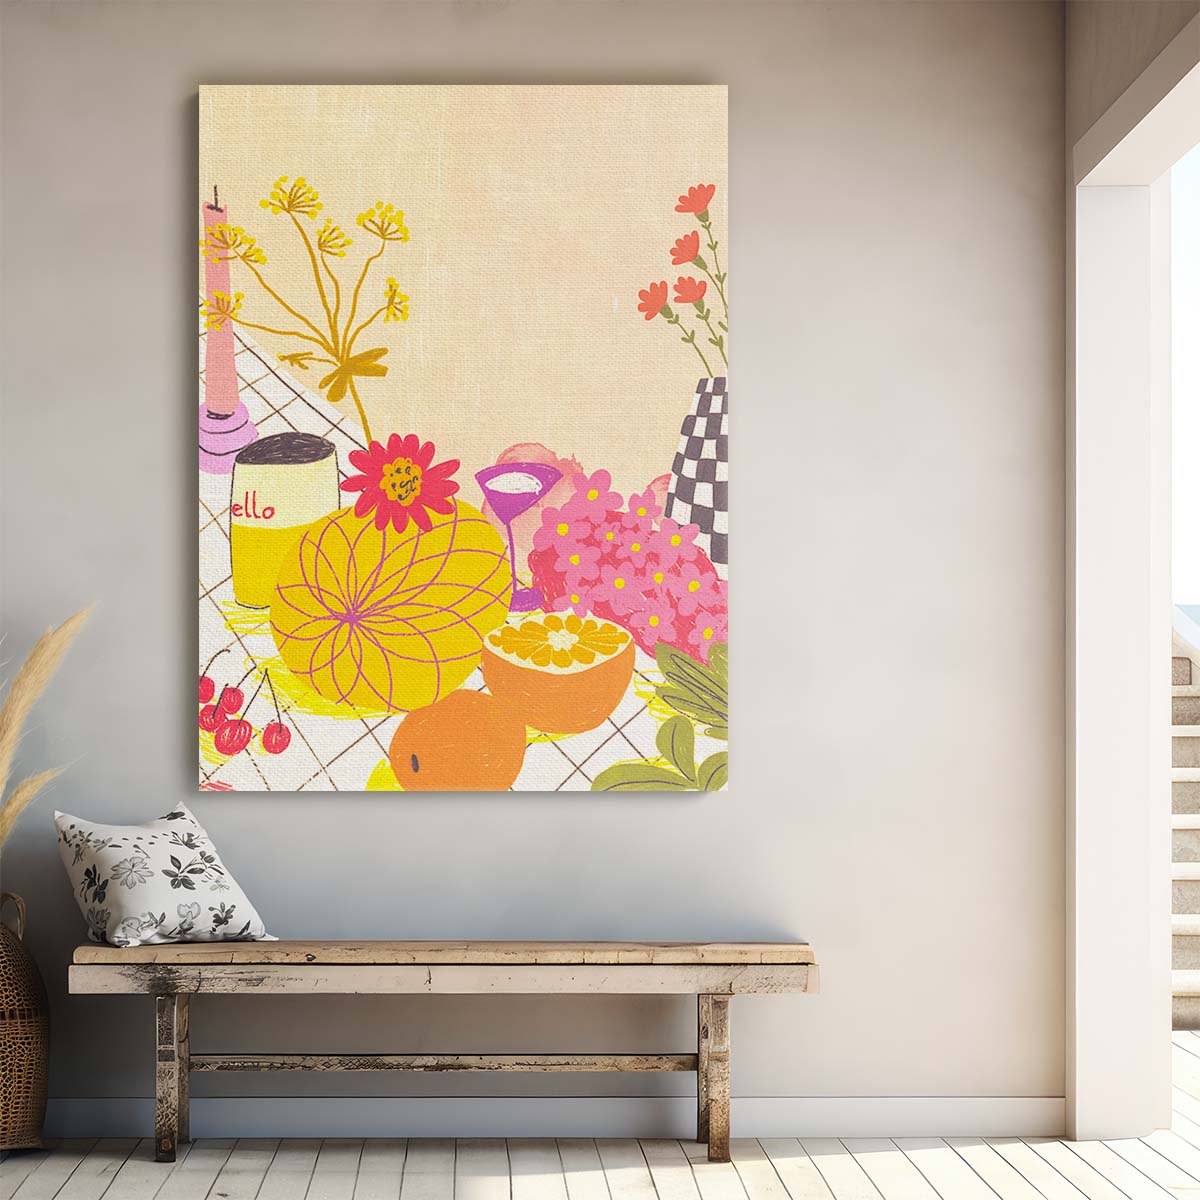 Colorful Citrus & Floral Still Life Illustration by Gigi Rosado by Luxuriance Designs, made in USA